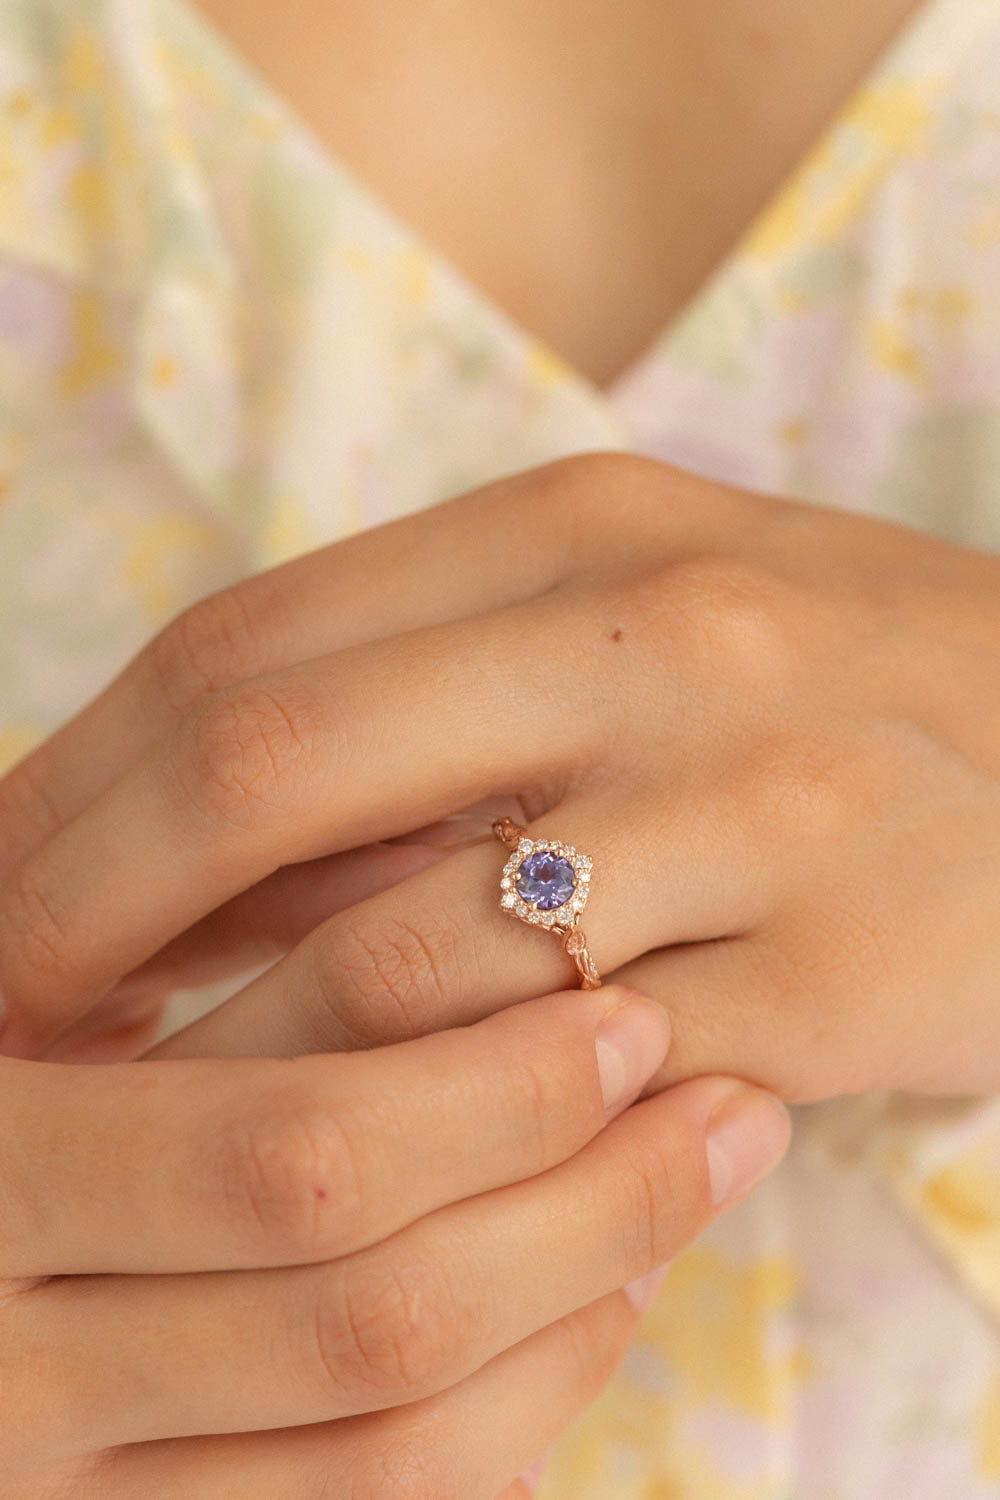 Lavender tanzanite engagement ring with diamond halo, rose gold leaves ring with diamonds / Florentina - Eden Garden Jewelry™